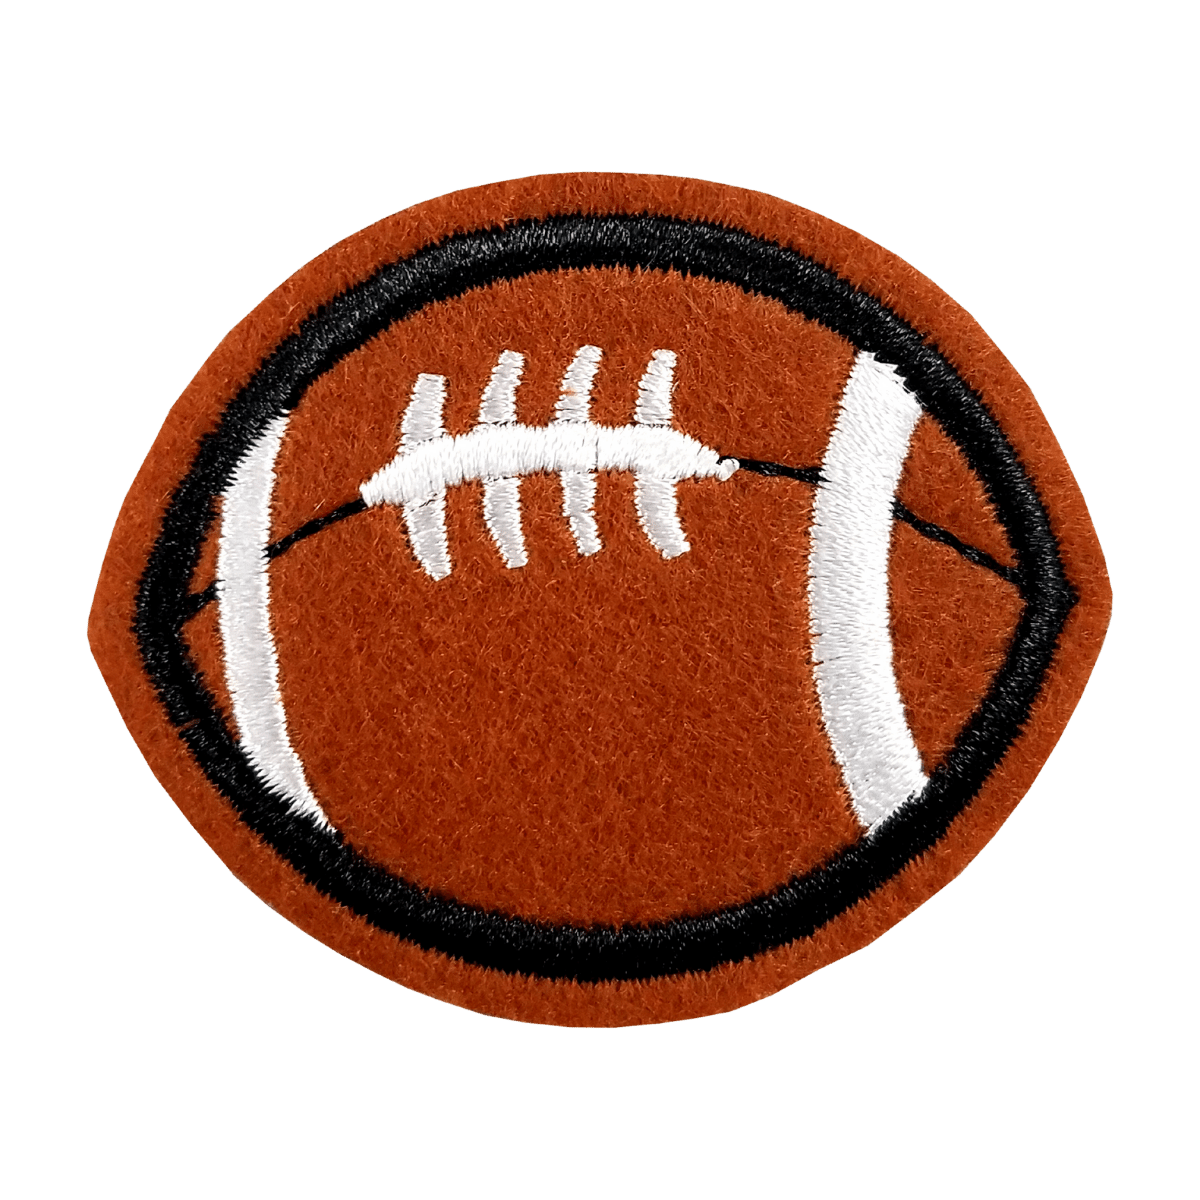 12 Pcs Ball Patches Soccer Ball Football Iron On Patches For Kids Jeans  Clothing Kids Sewing For Men Backpack Applique Diy Craft(diameter 5cm)